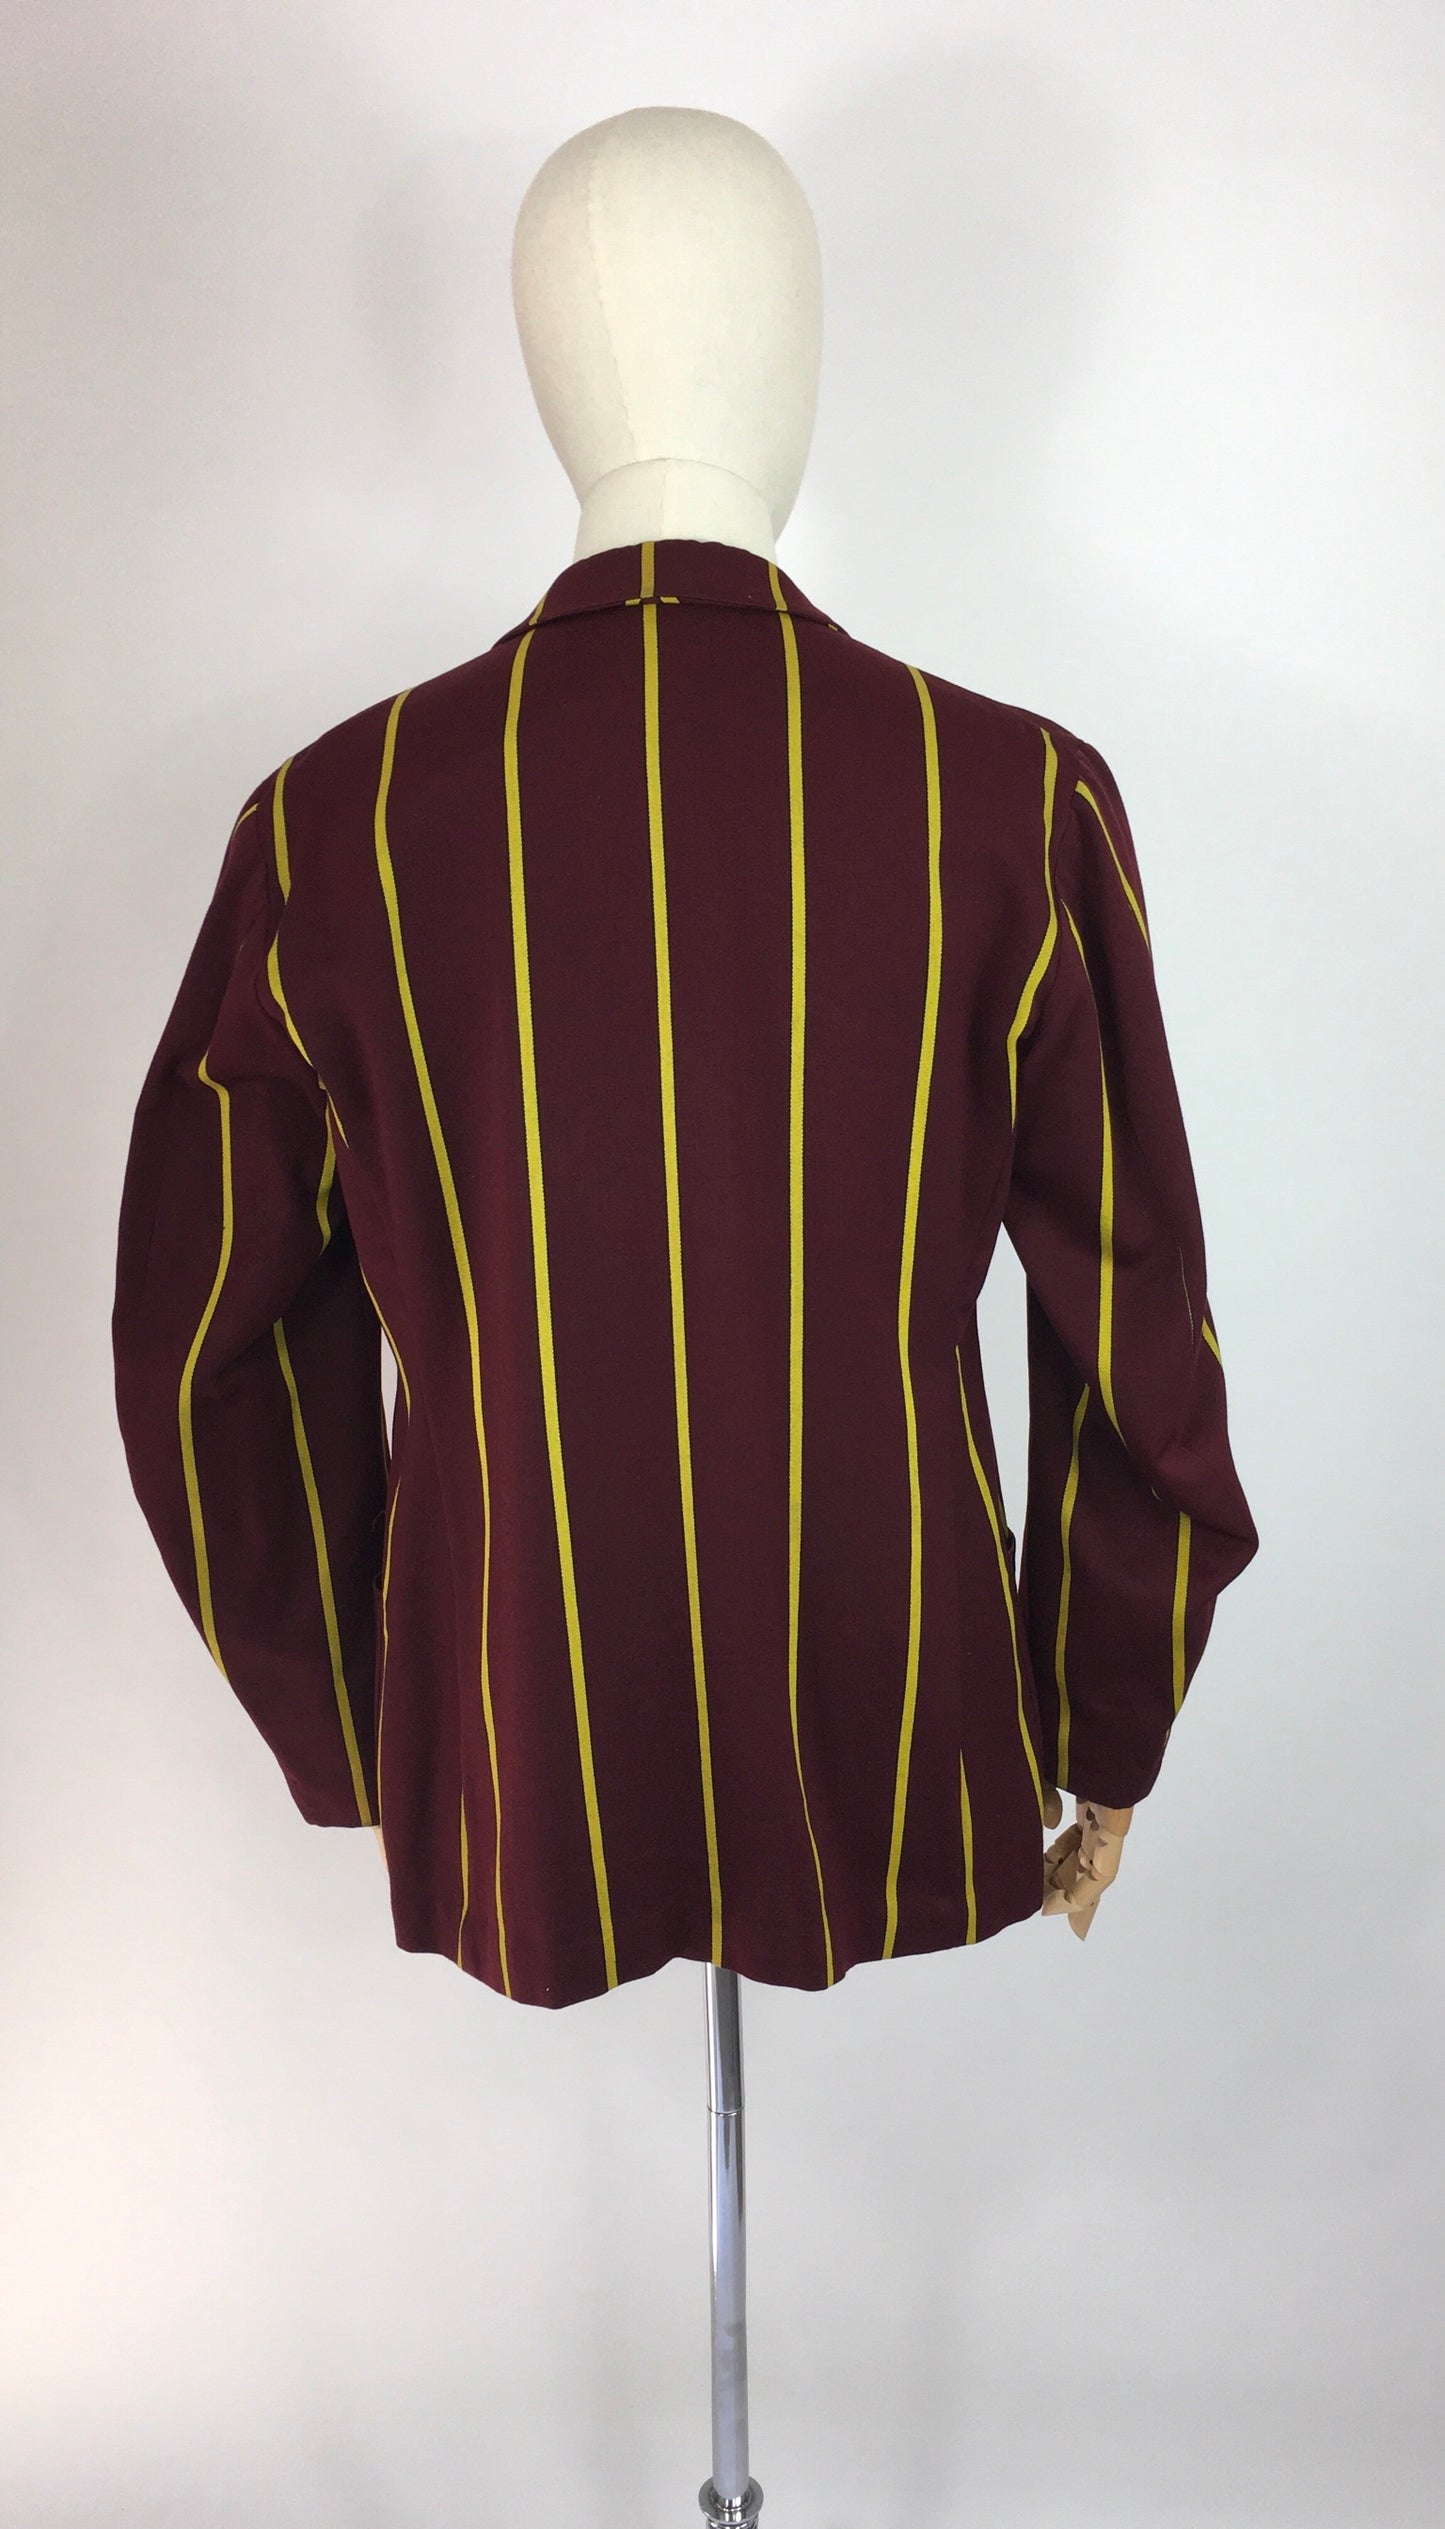 Original College Blazer By ‘ Ryder and Amies Cambridge’ - In a Lovely Burgundy and Yellow Stripe